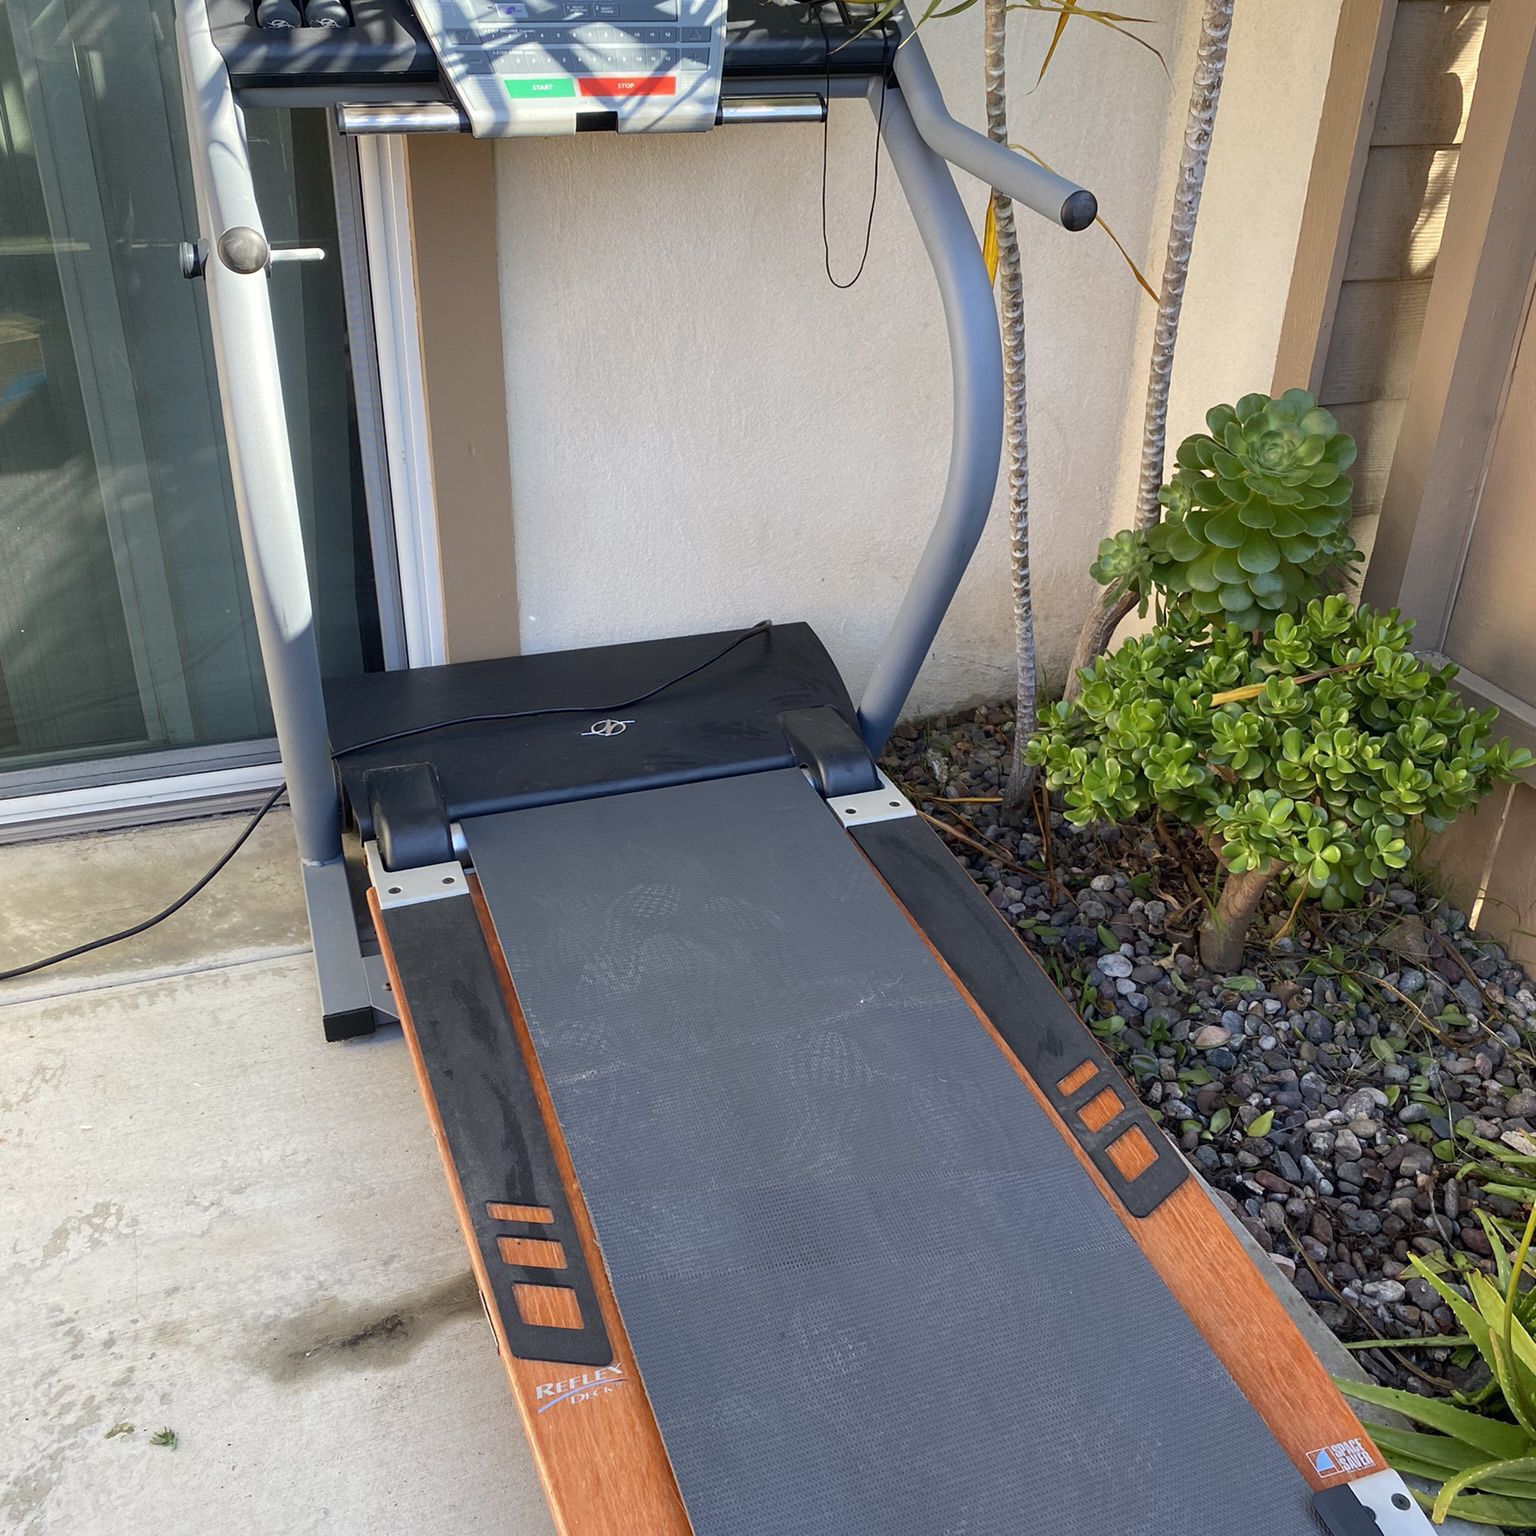 NardicTrack Treadmill Foldable With Weights